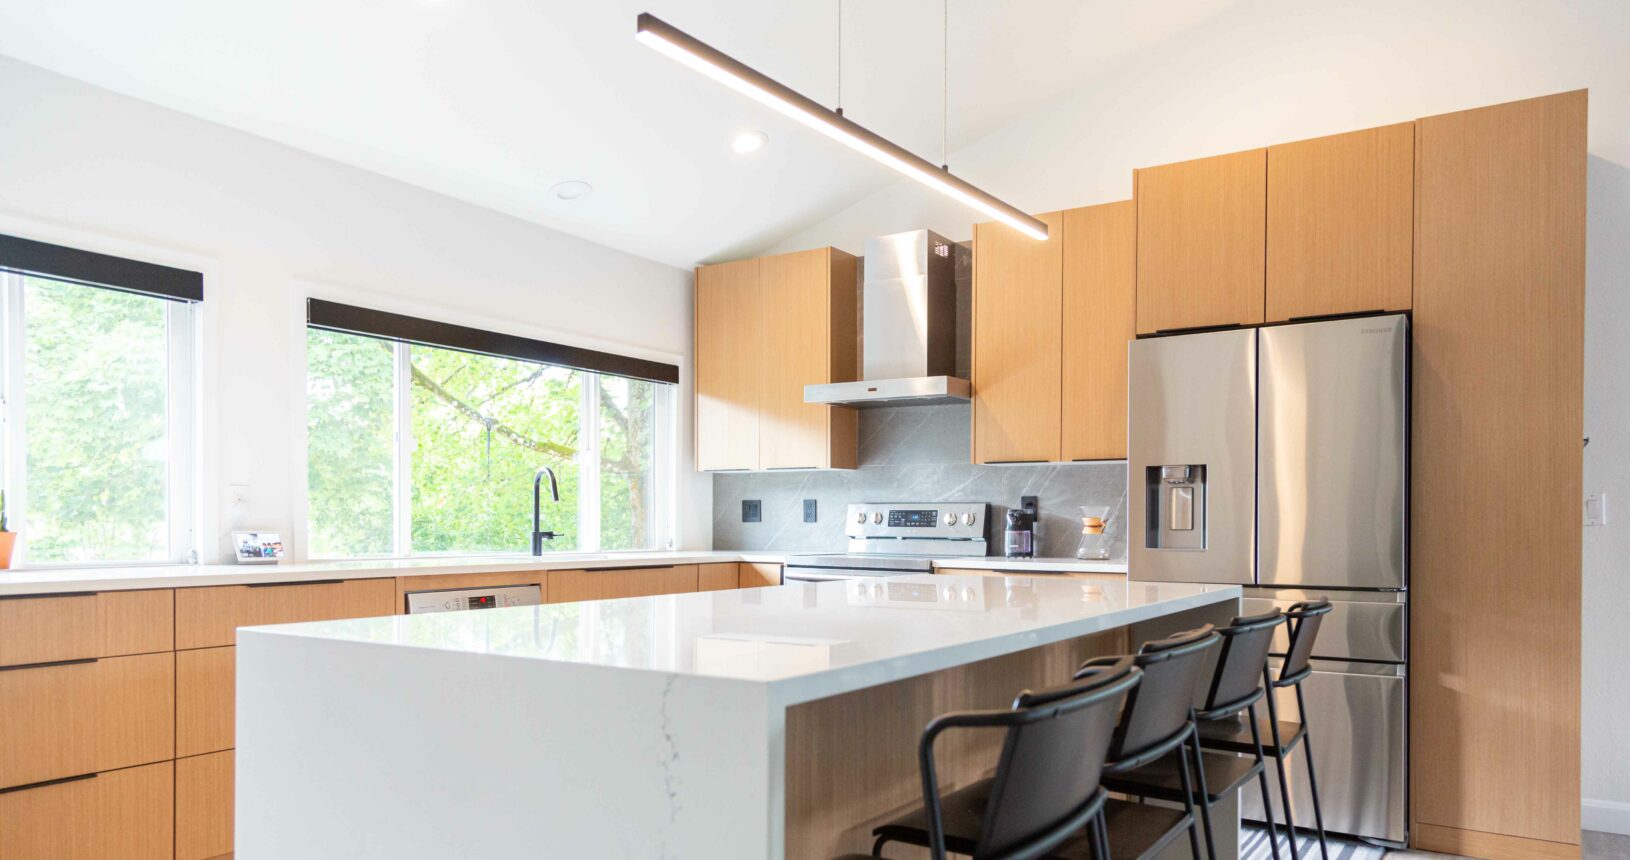 image of kitchen with white countertops